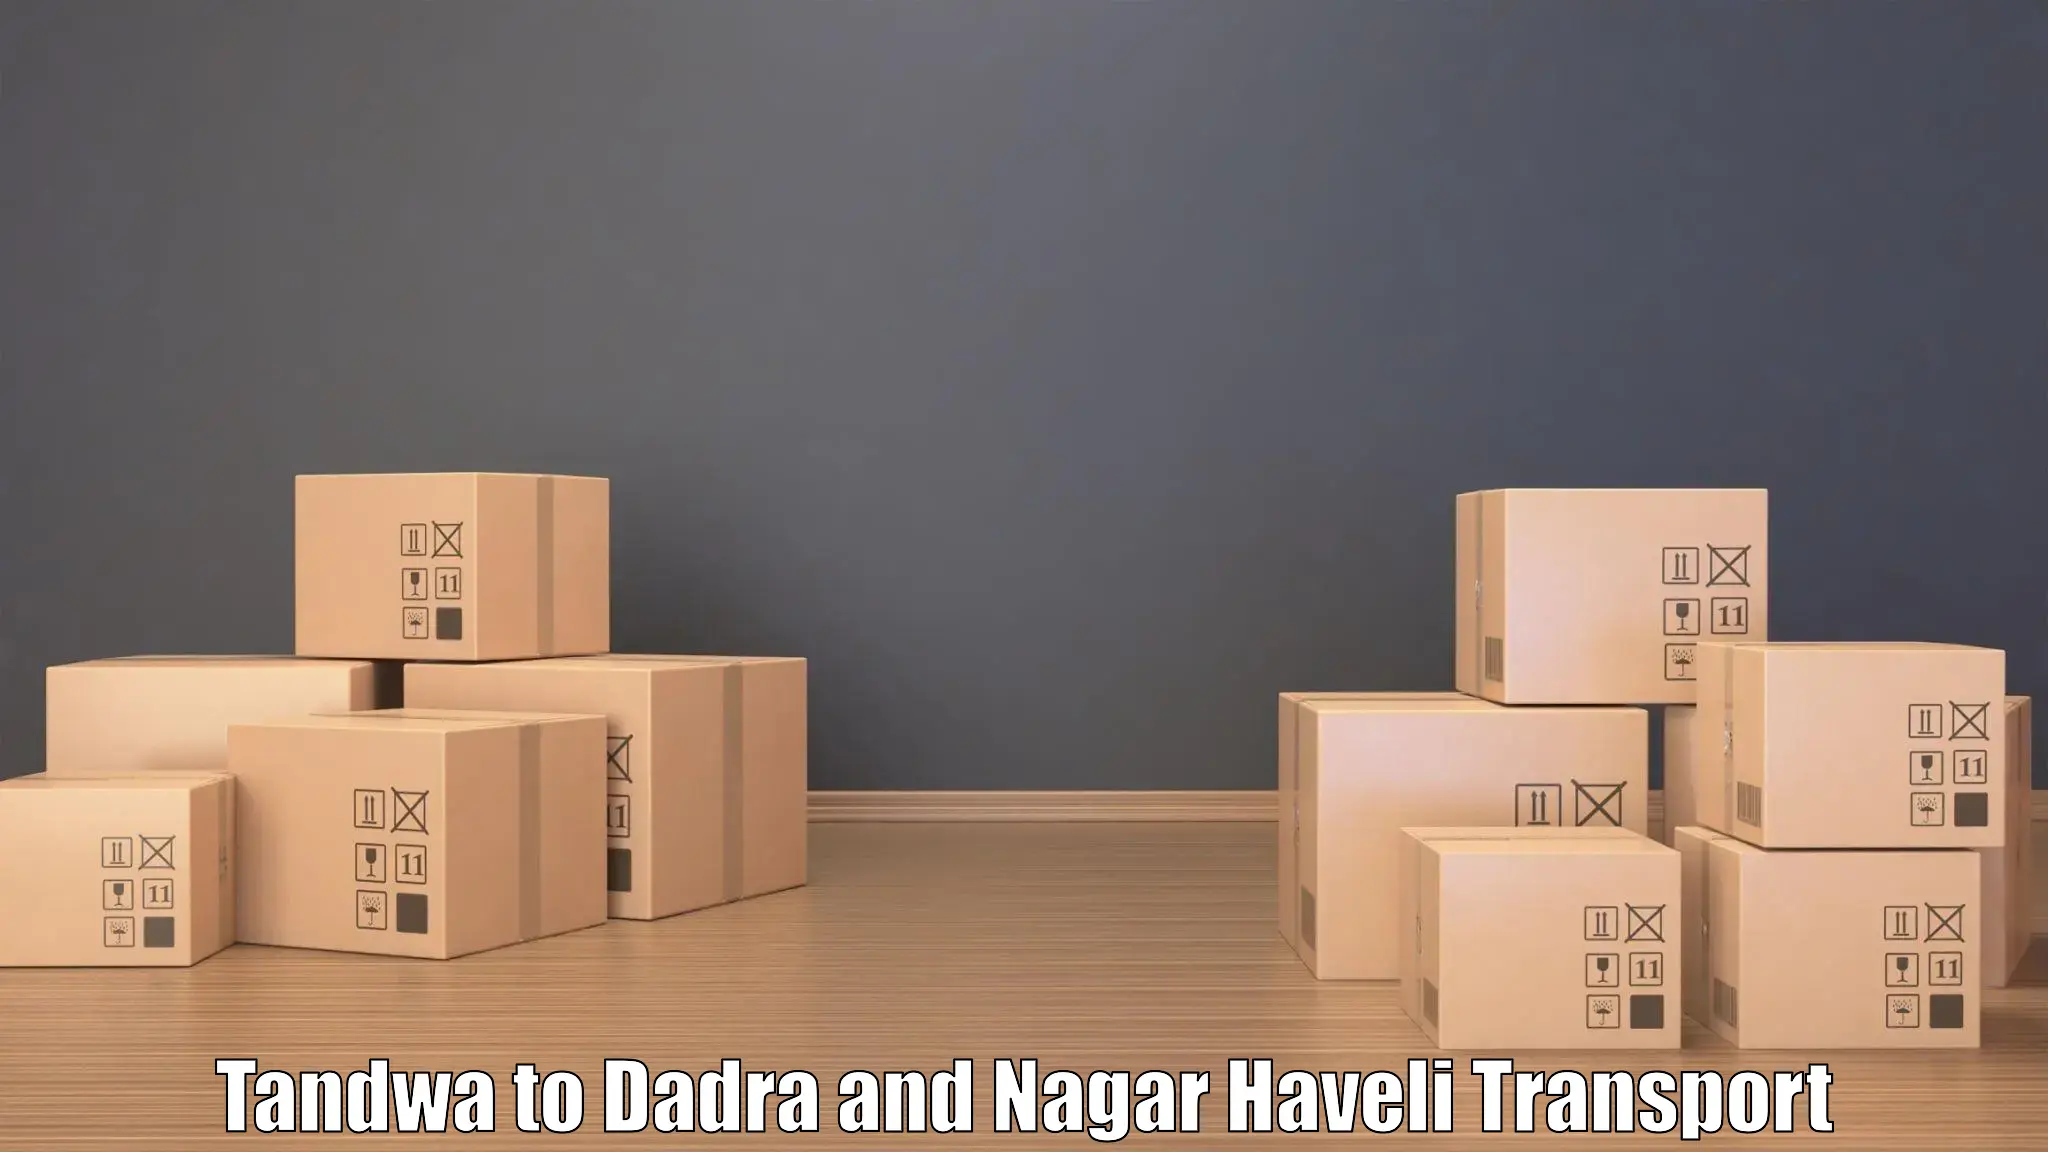 Transport bike from one state to another Tandwa to Dadra and Nagar Haveli